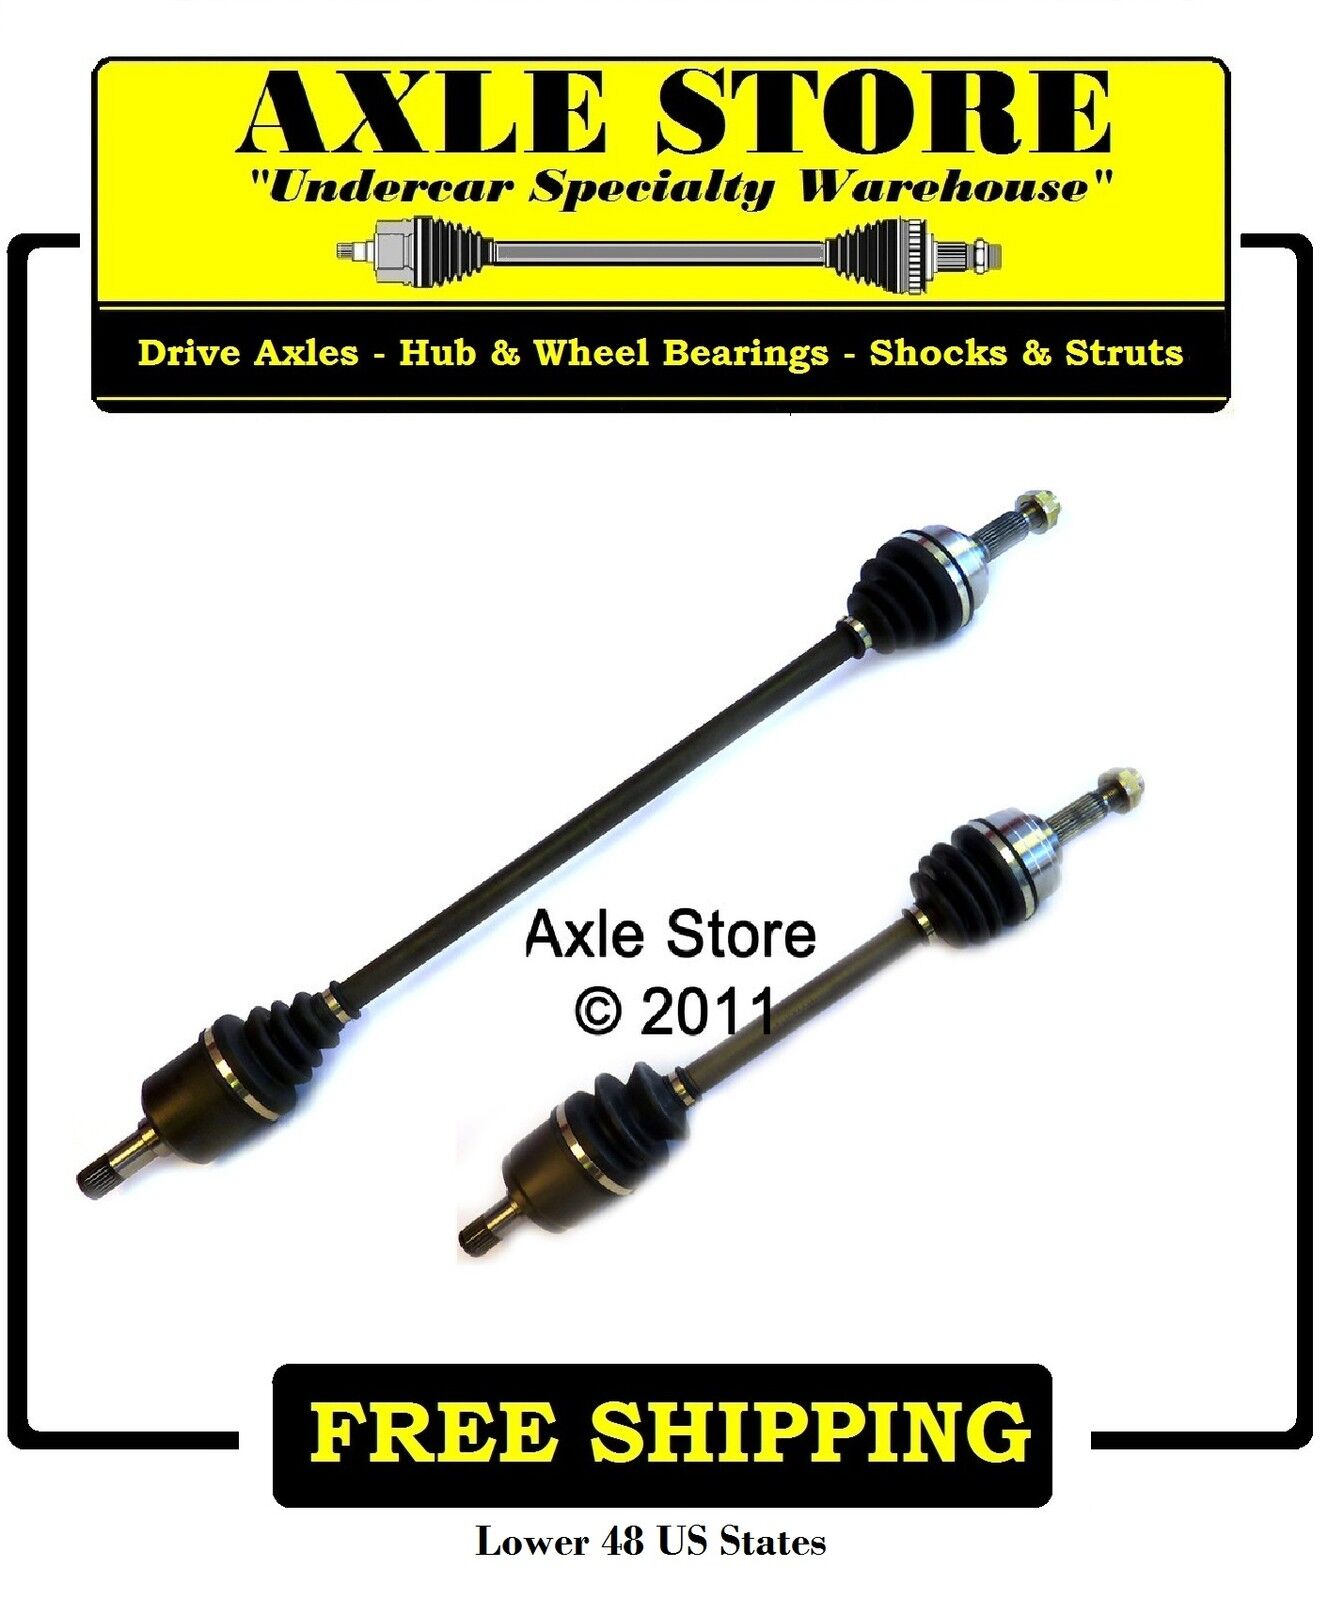 2 New CV Axles Fit 1988 - 1991 Honda Civic, CRX with 26 Splines Outer Joints